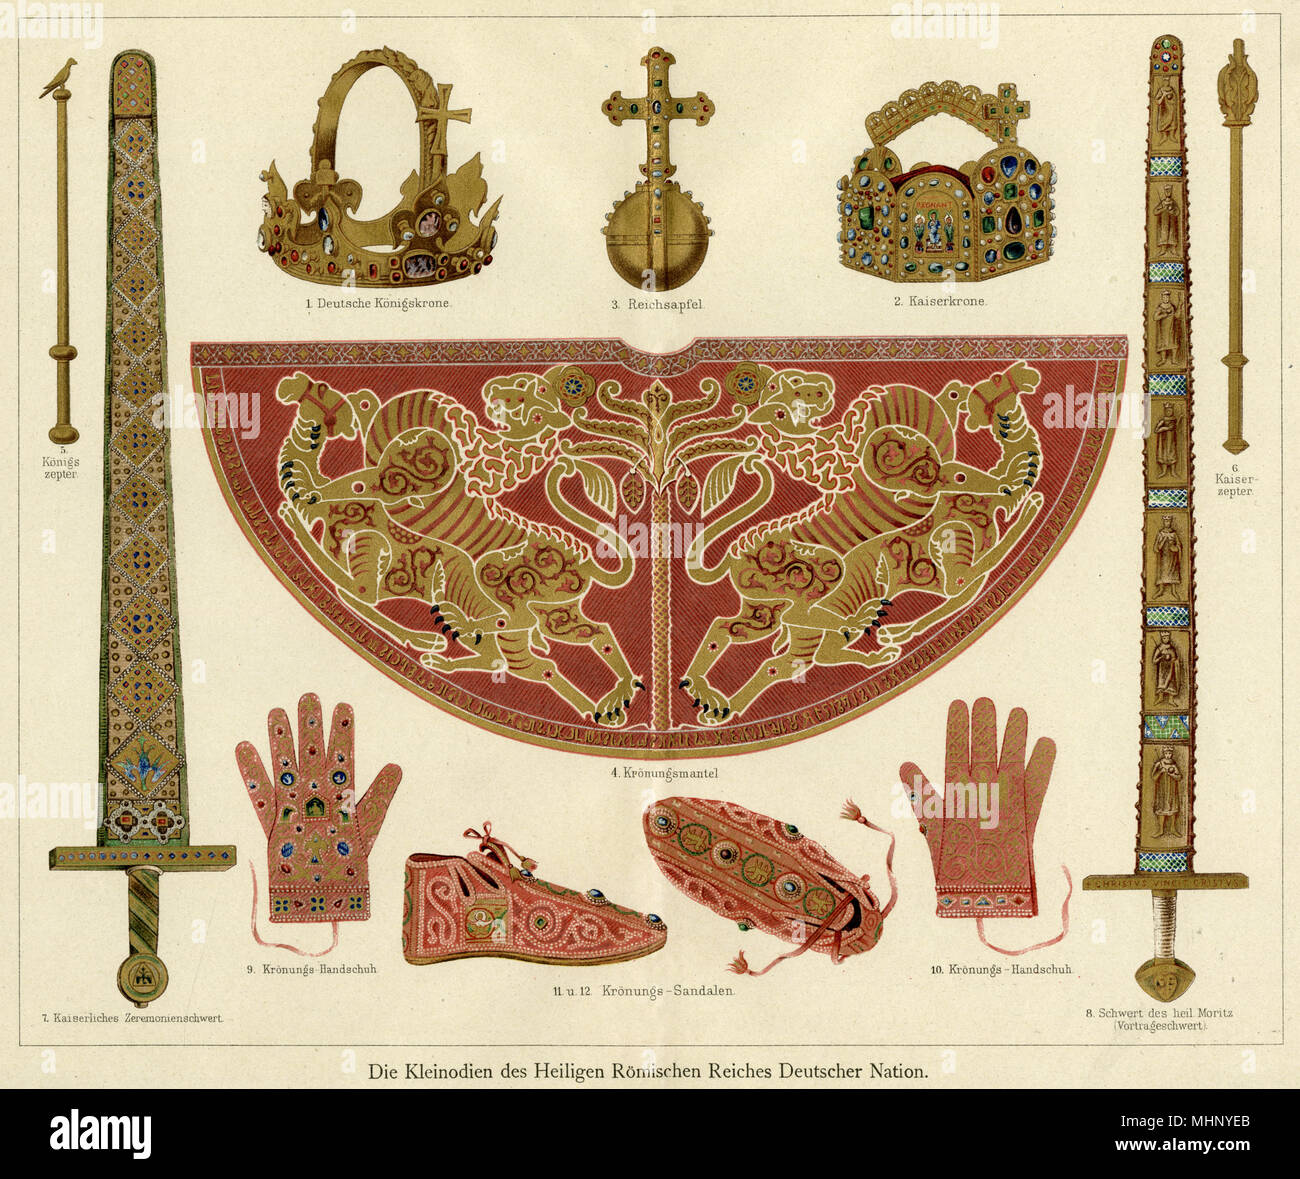 Some of the coronation regalia of the Holy Roman Empire of the German Nation: 1. German Royal Crown; 2. Imperial Crown; 3. Orb; 4. Coronation Robe; 5. King's Sceptre; 6. Imperial Sceptre; 7. Imperial Ceremonial Sword; 8. Sword of Saint Moritz; 9/10. Coronation Gloves; 11/12. Coronation Sandals.      Date: medieval Stock Photo